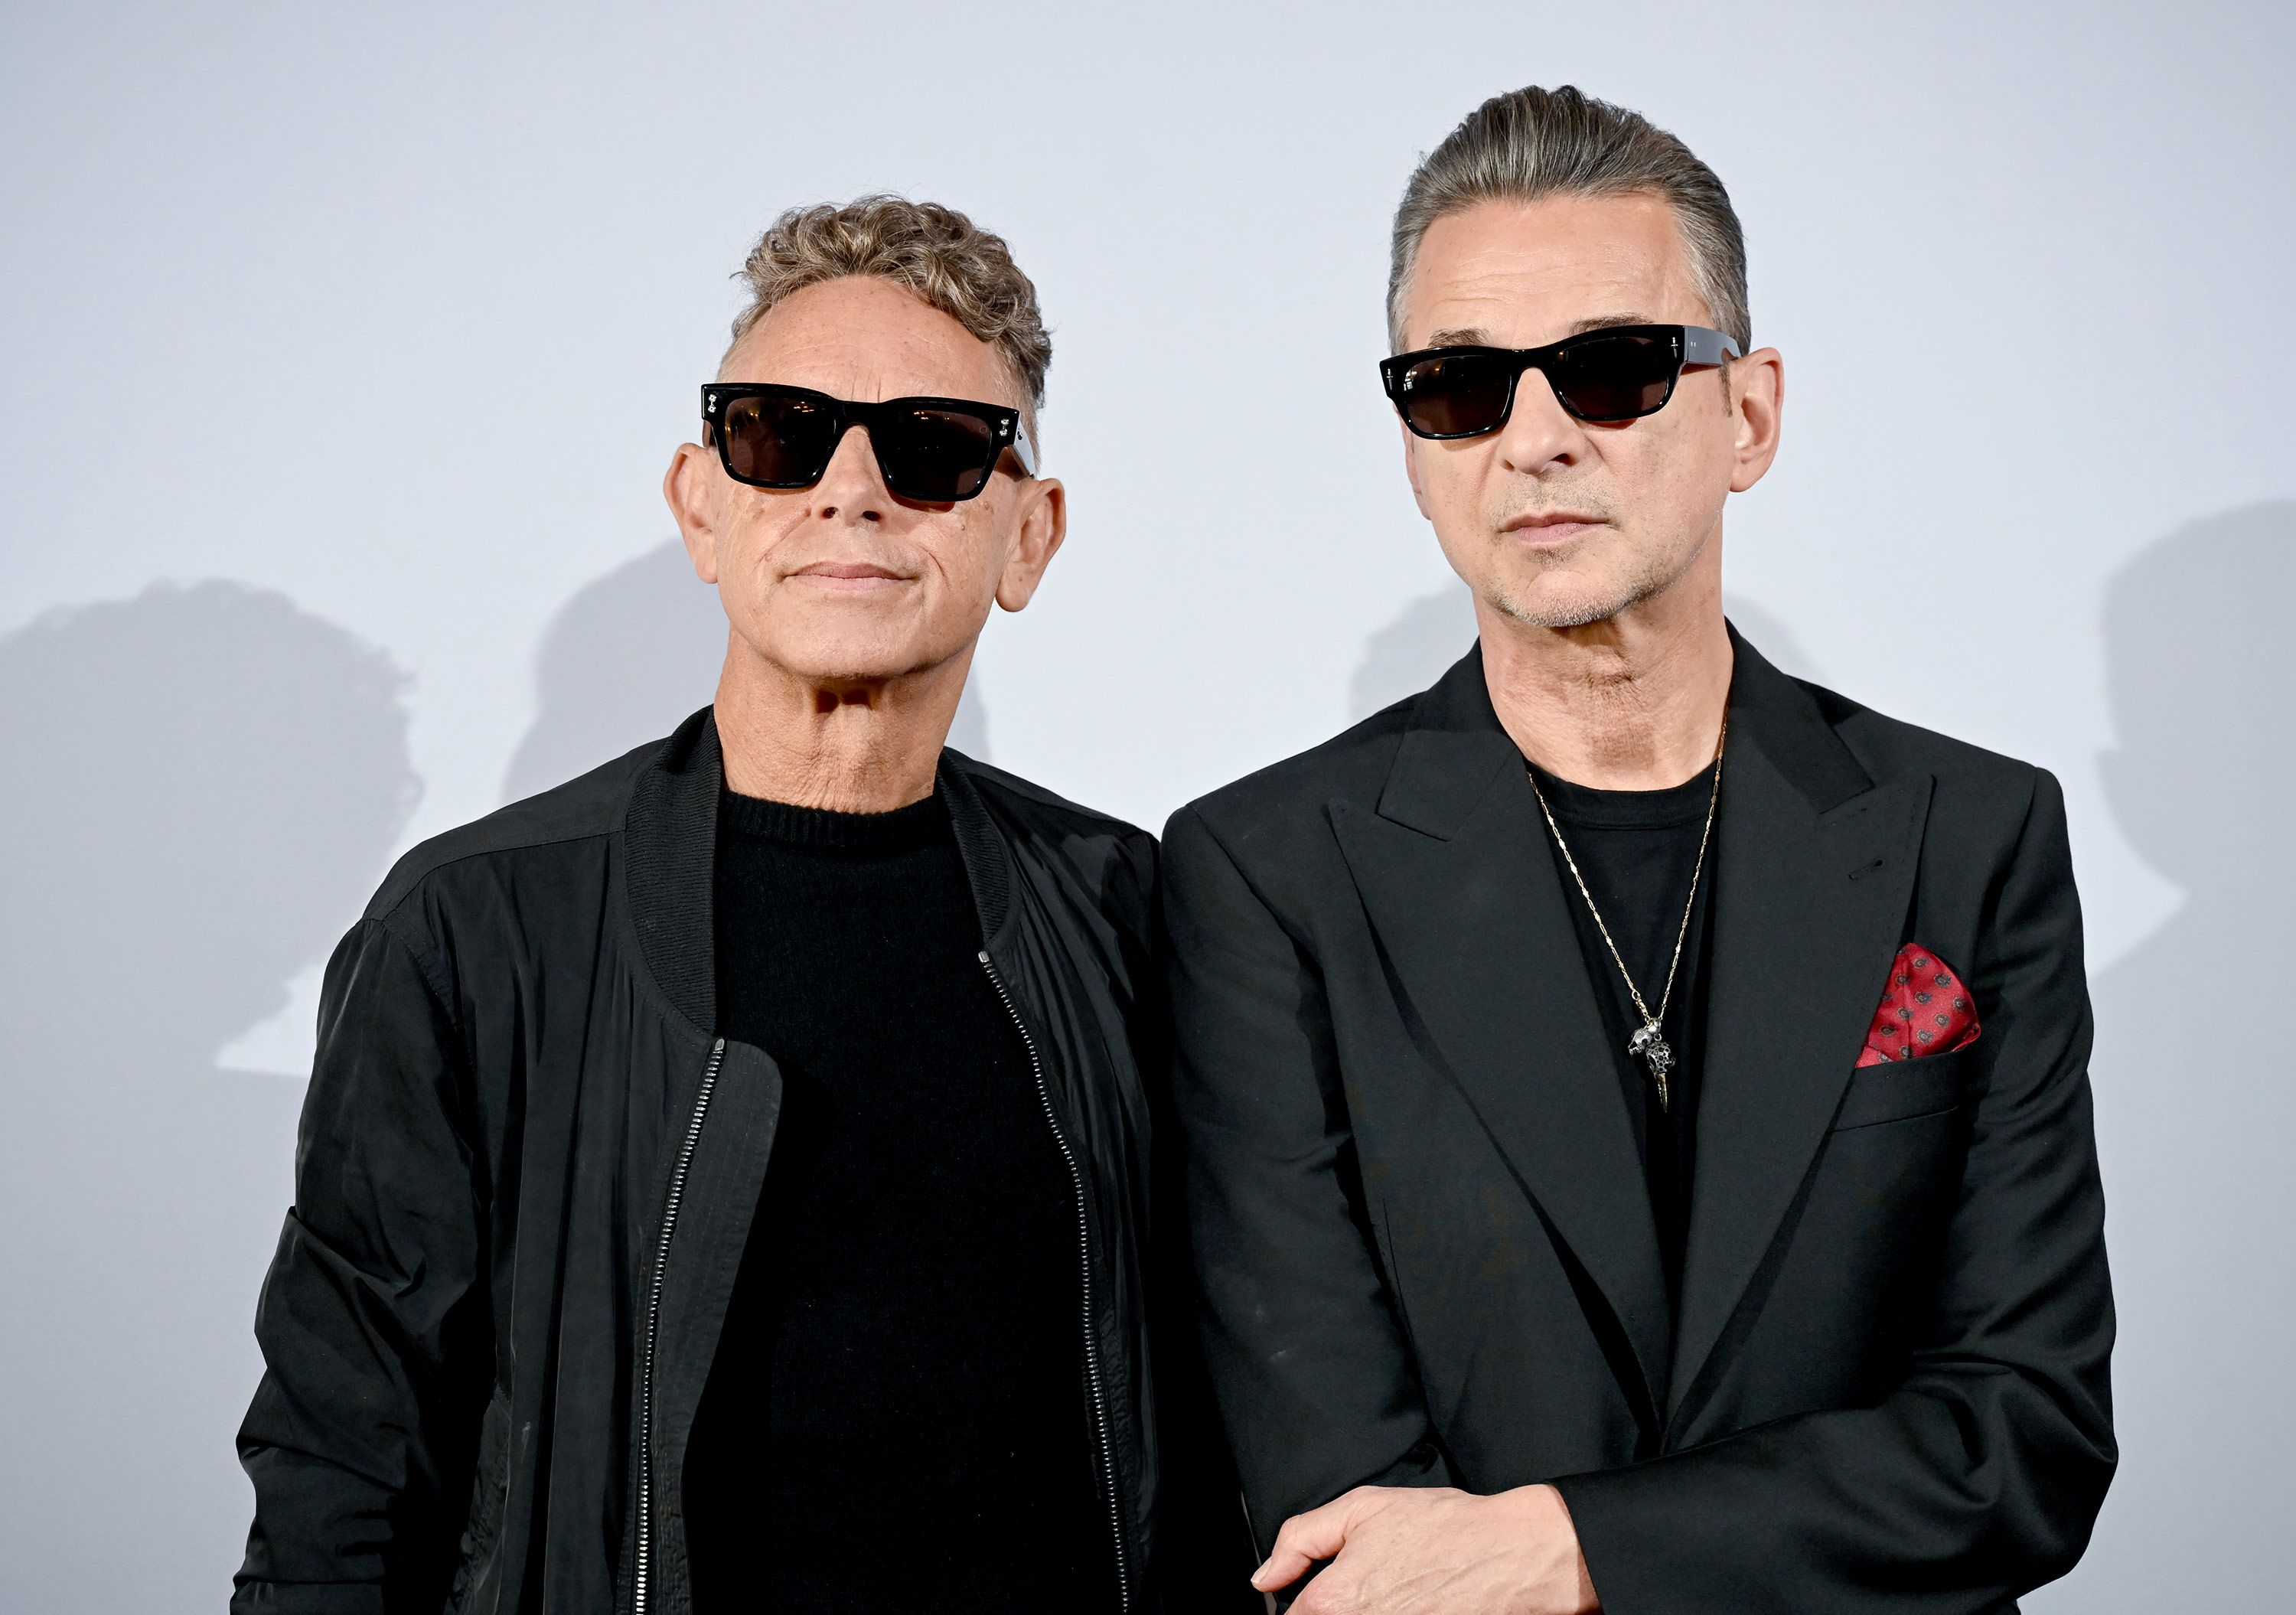 Depeche Mode members - Then and now 2023 